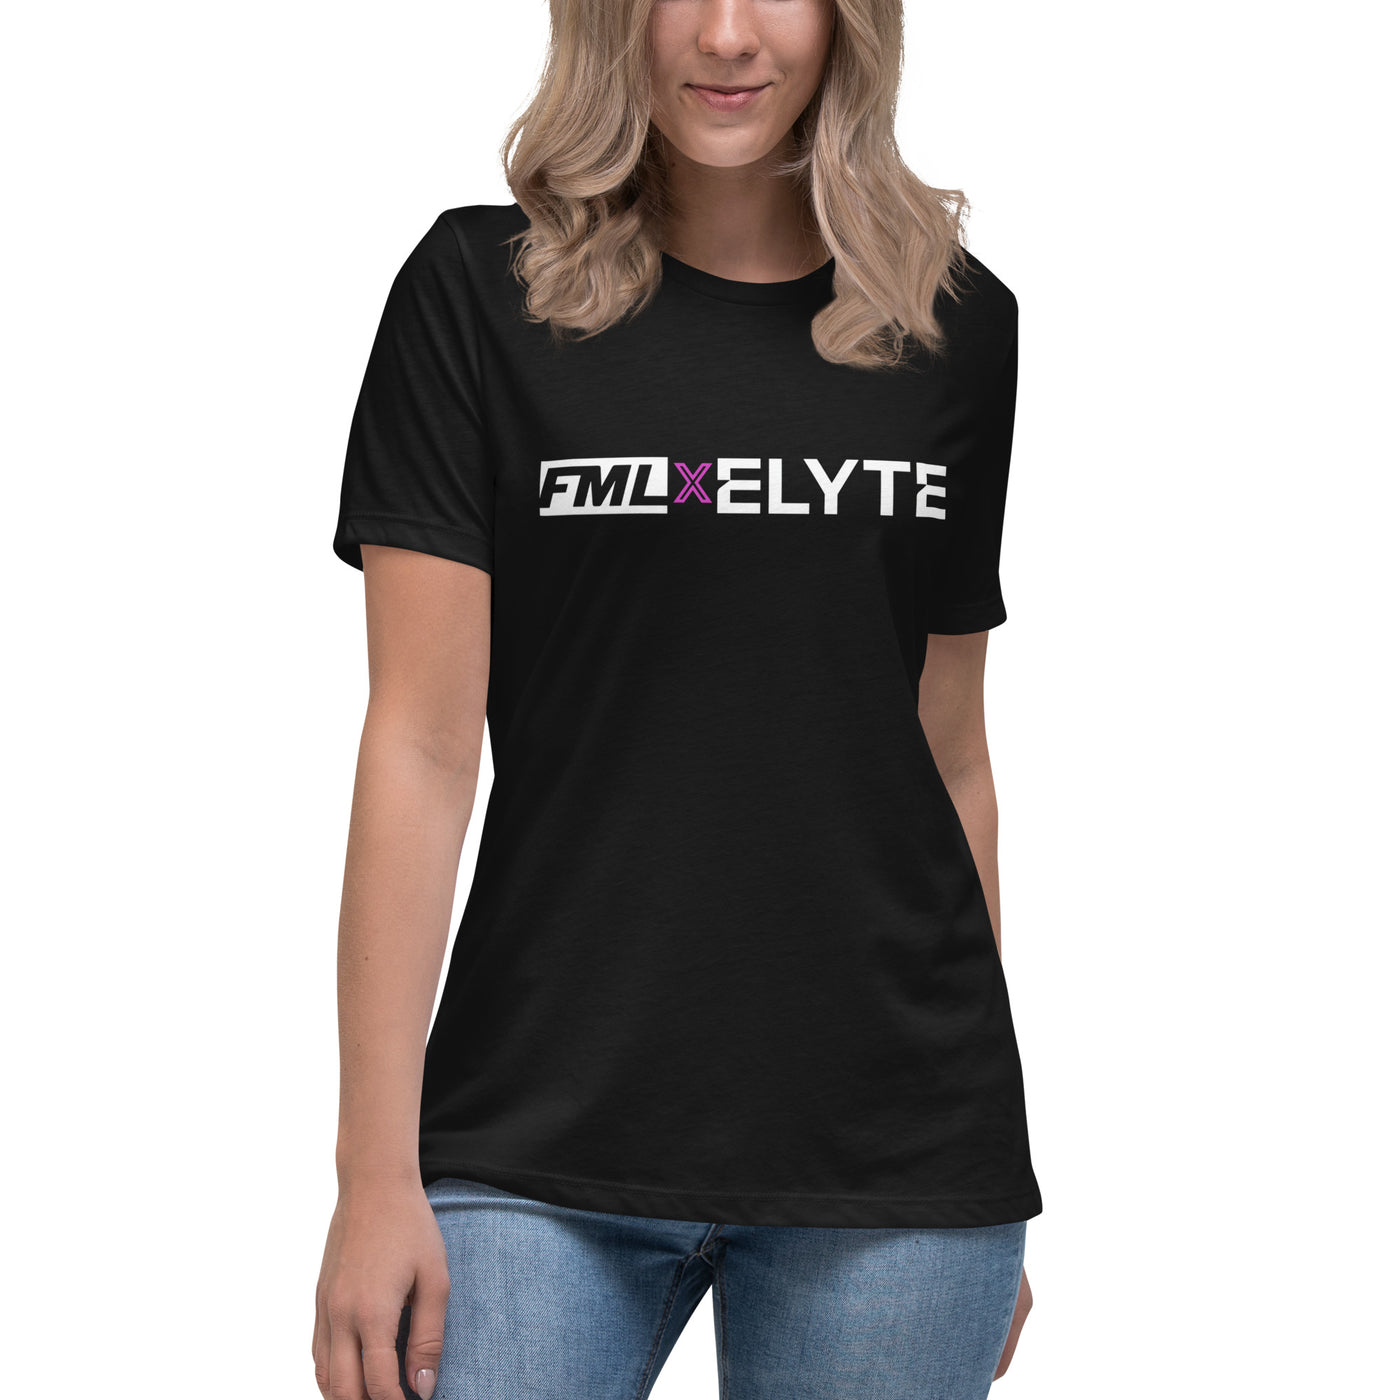 FML X ELYTE Women's Black Relaxed TEE with Pink Accent